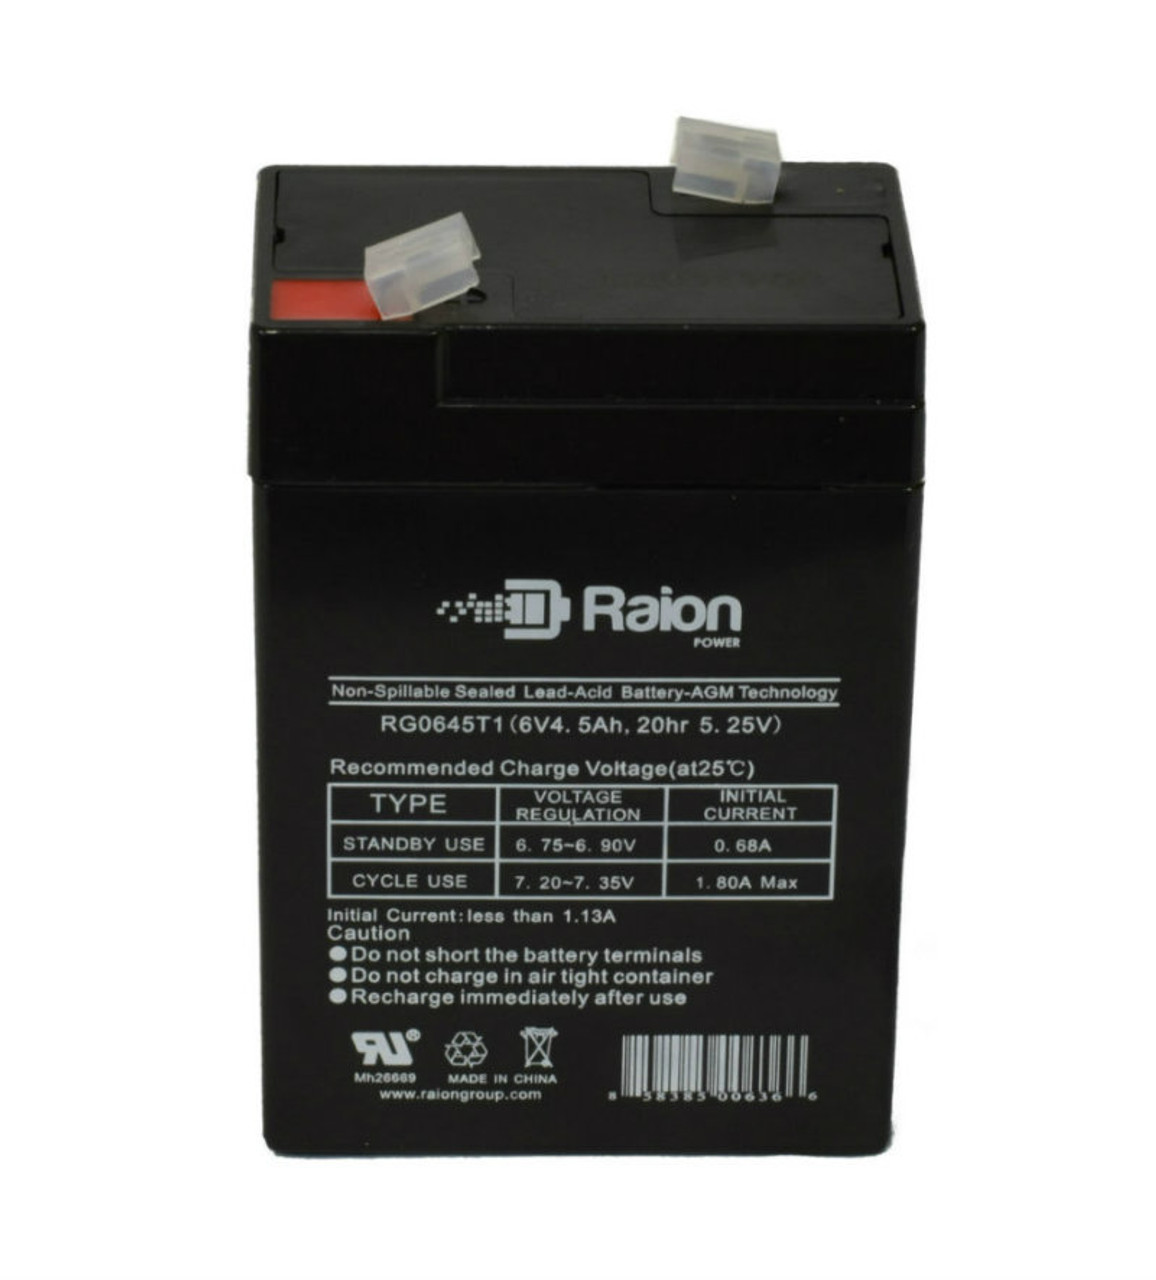 Raion Power RG0645T1 Replacement Battery Cartridge for Little Tikes H3 Hummer